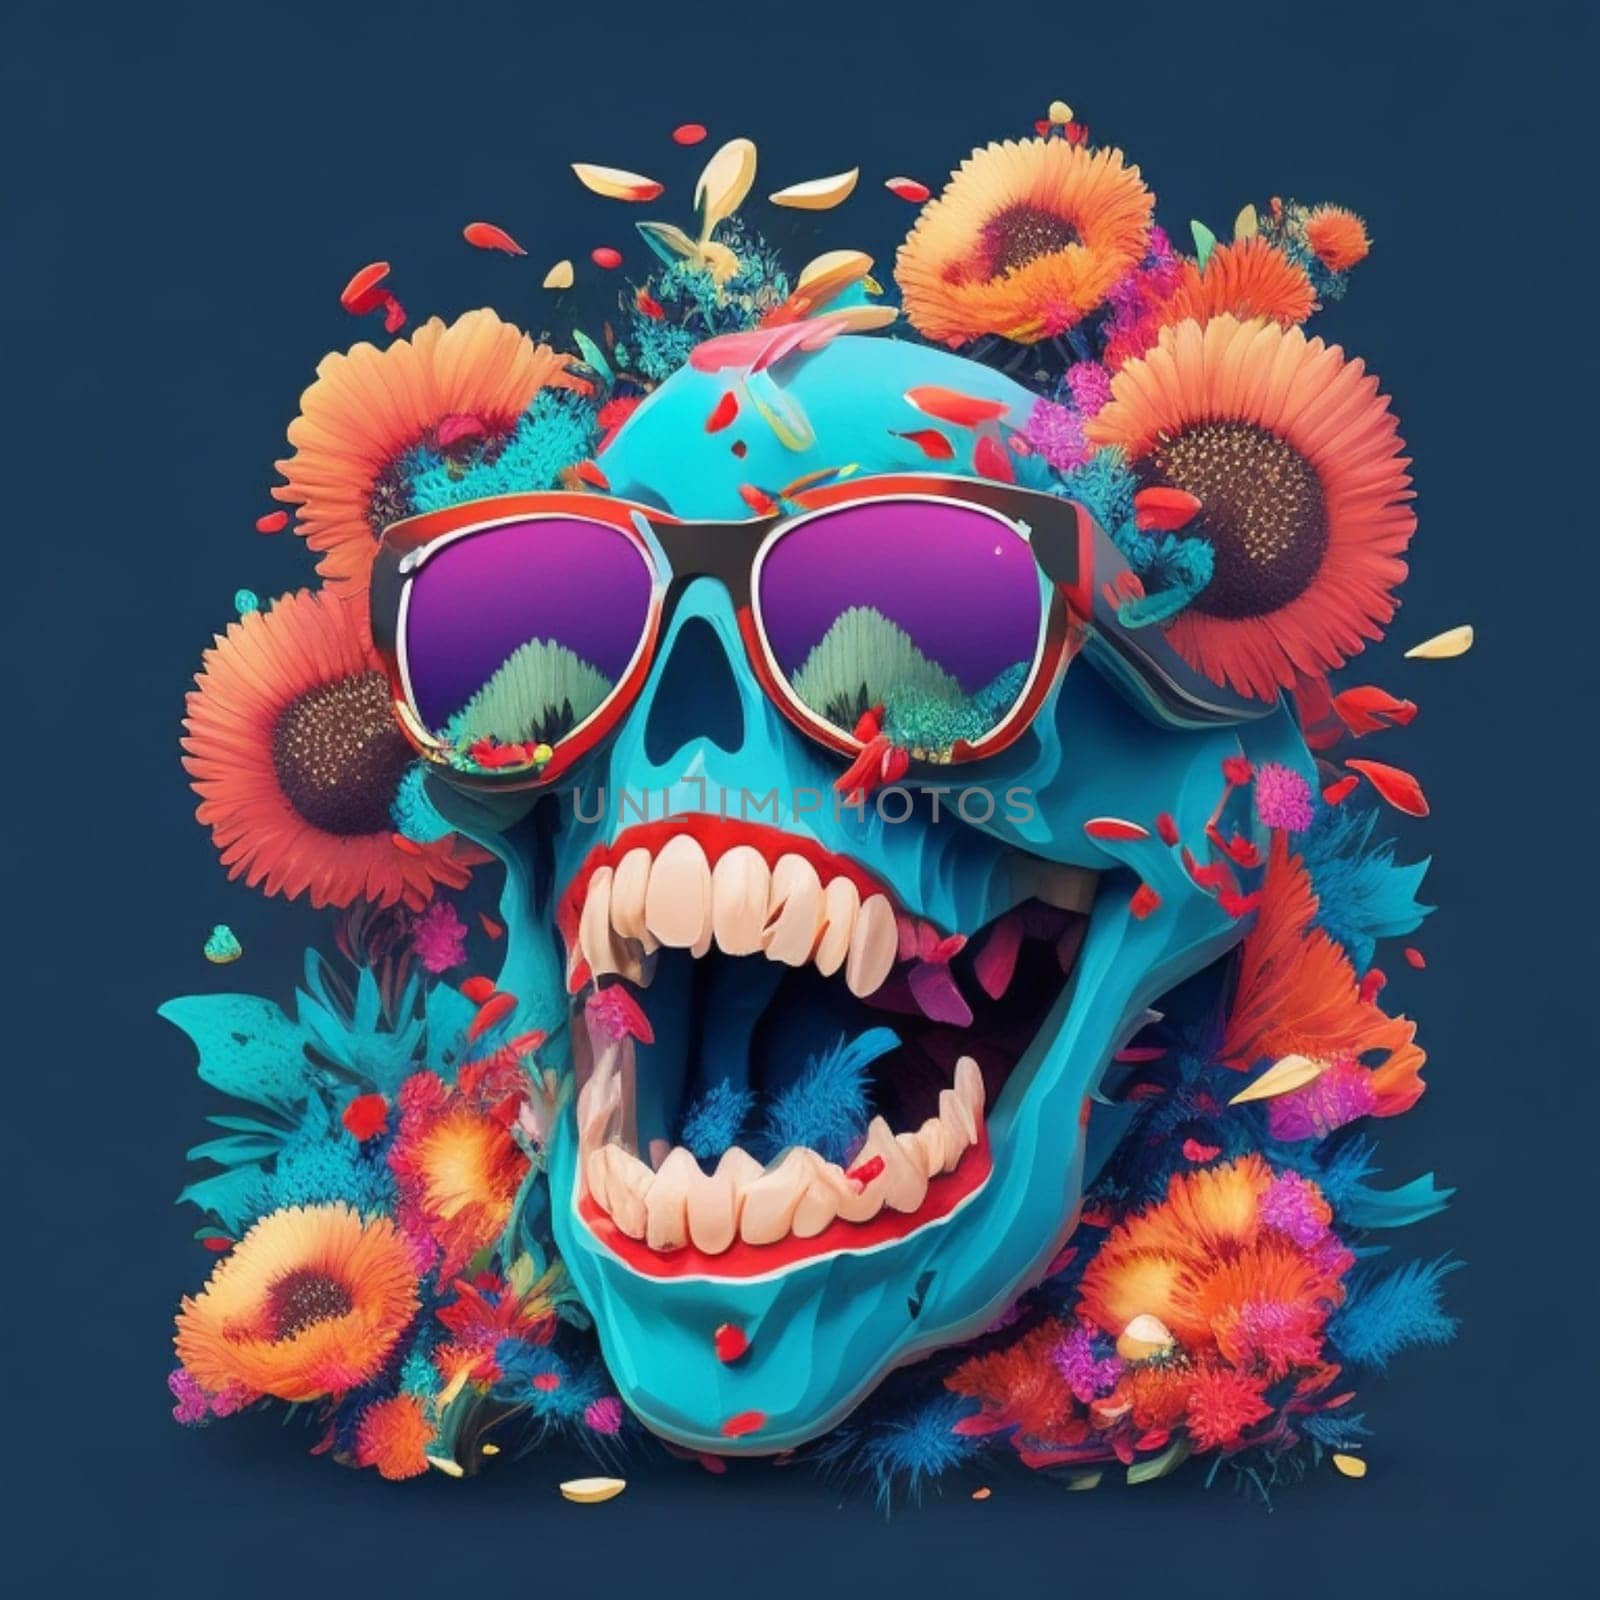 skull smile 3d illustration render happy horro mood wearing sunglasses surrounded by flowers generative ai art